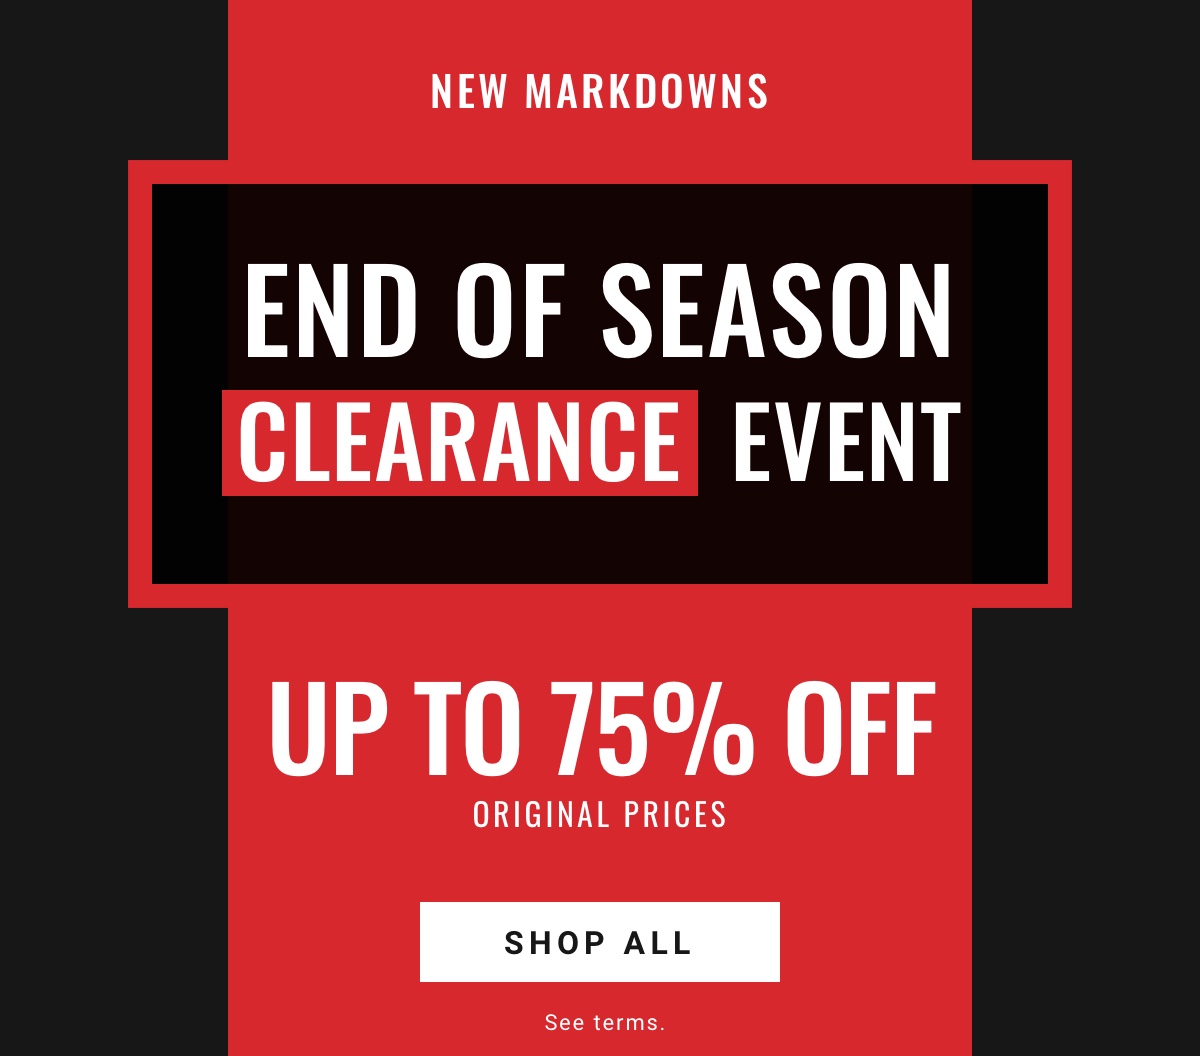 End of Season Clearance | Event plus New Markdowns - Up to 75% Off - Shop All